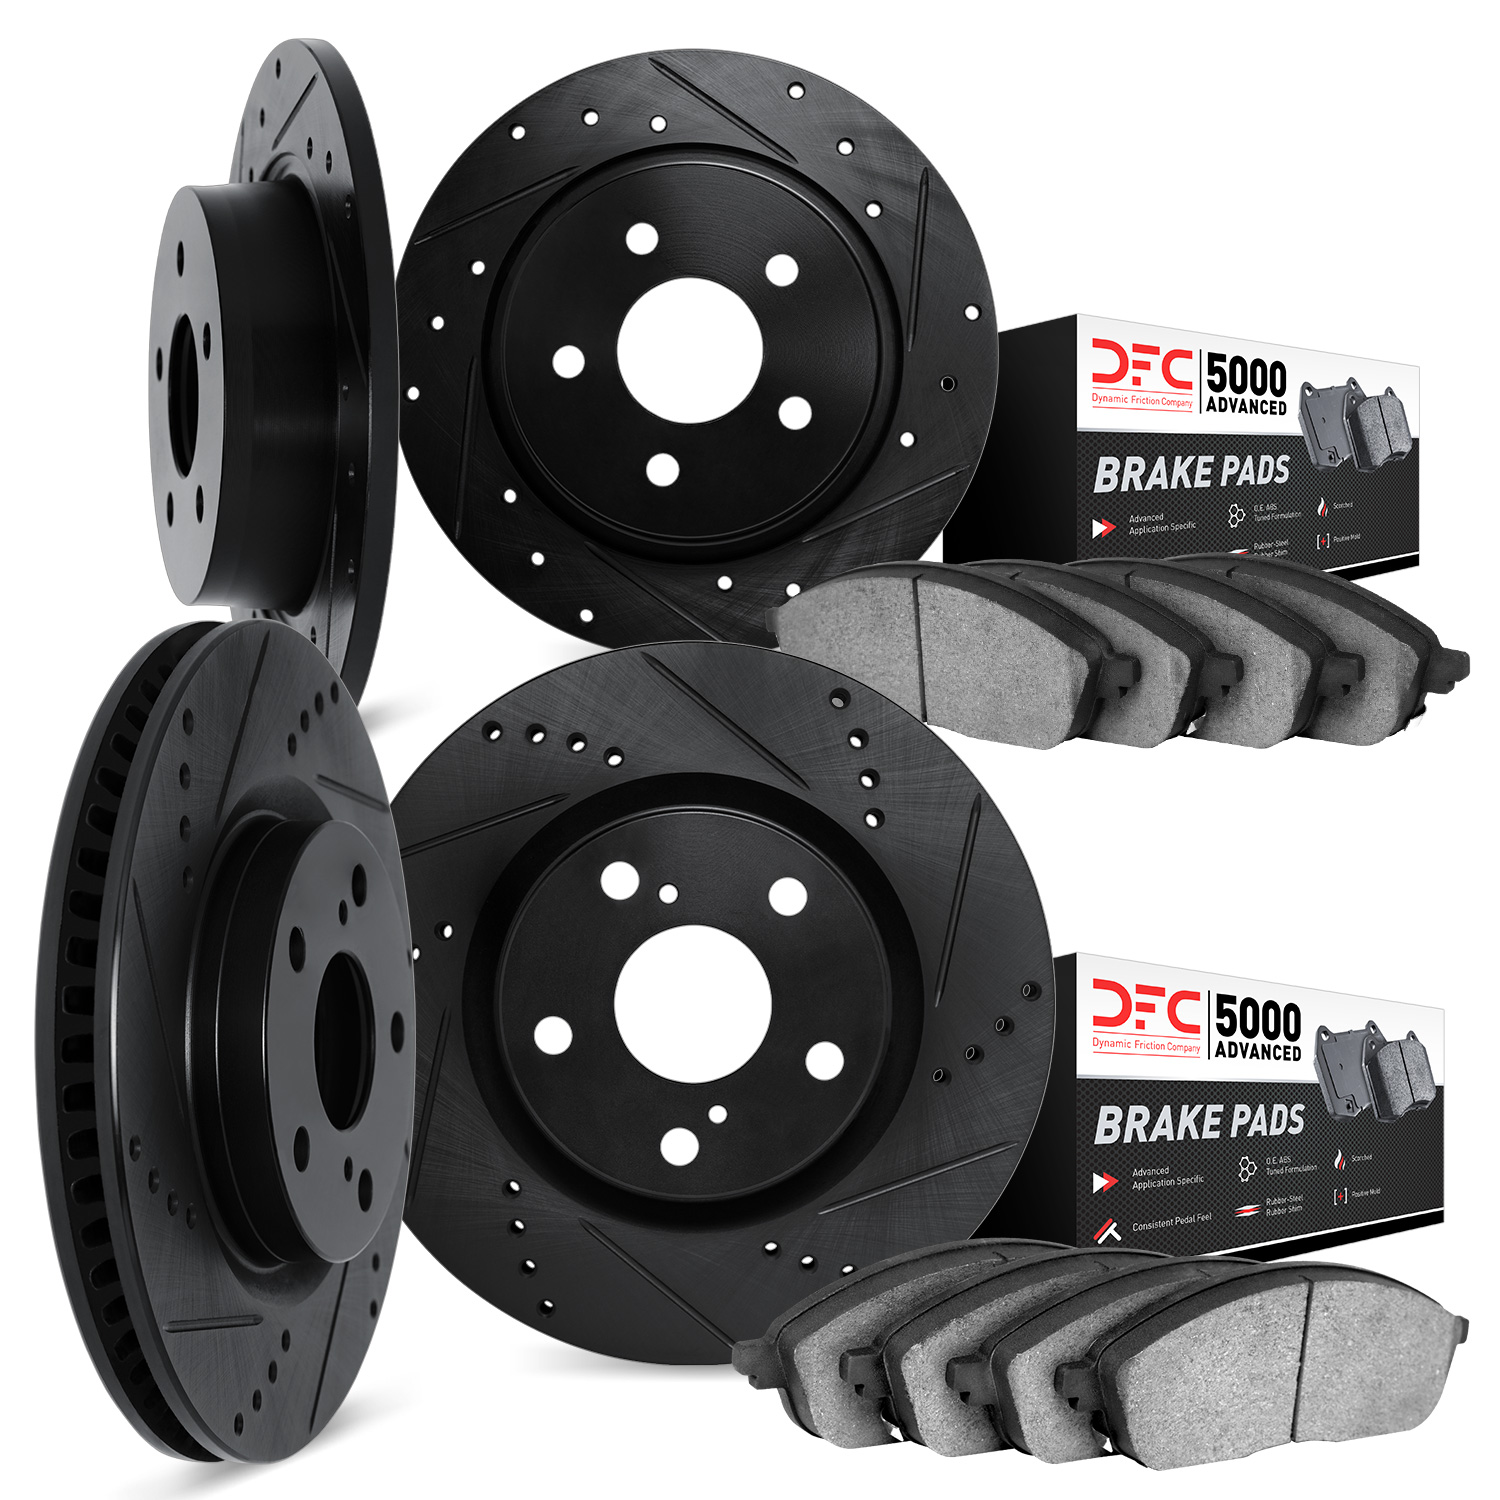 8504-76160 Drilled/Slotted Brake Rotors w/5000 Advanced Brake Pads Kit [Black], Fits Select Lexus/Toyota/Scion, Position: Front